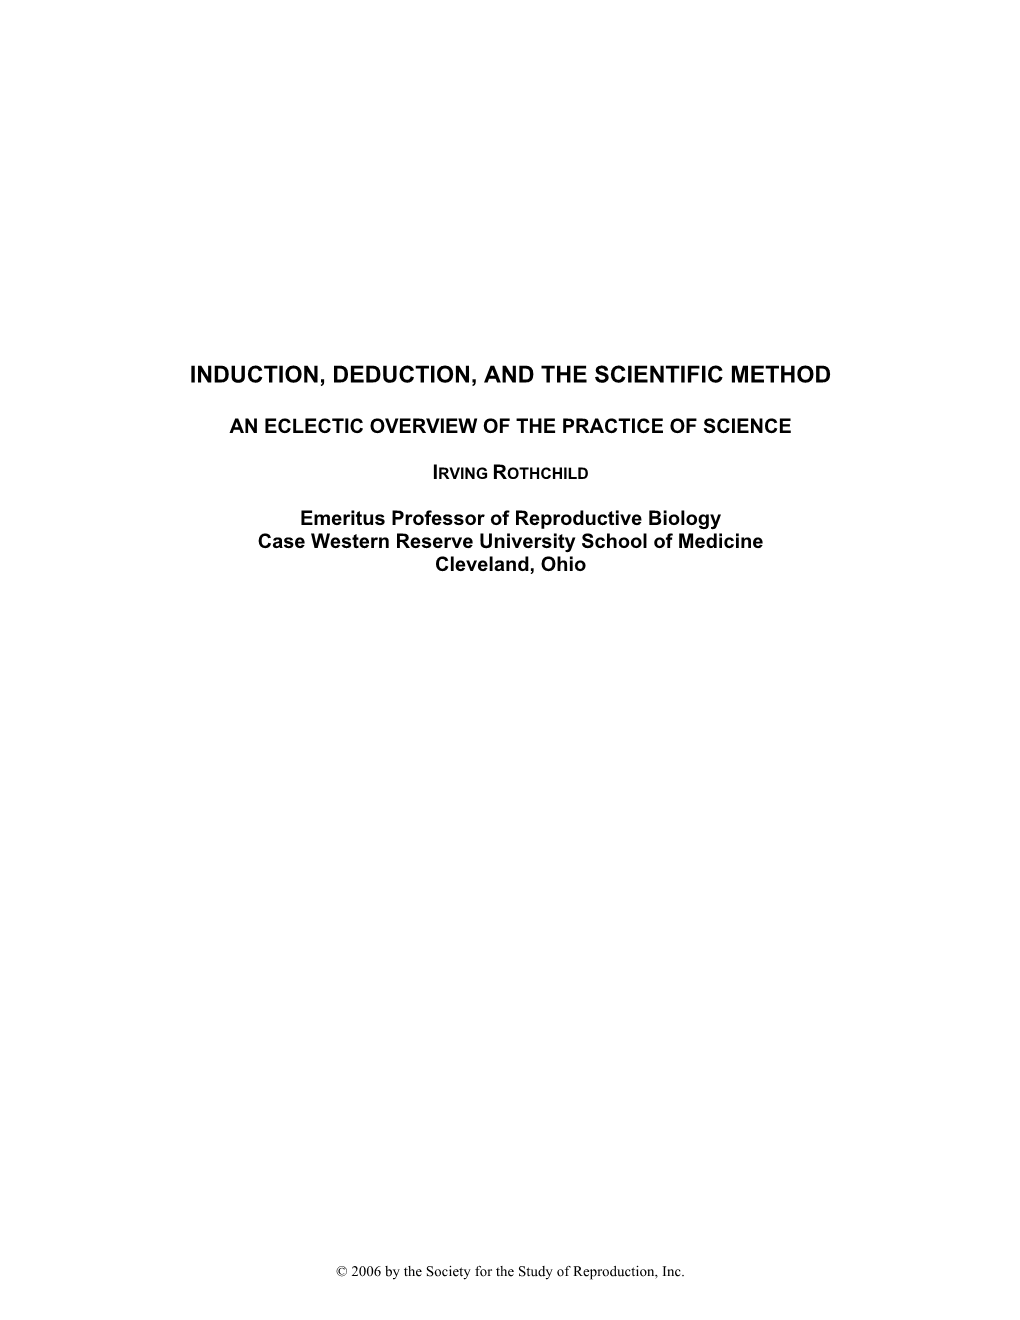 Induction, Deduction, and the Scientific Method